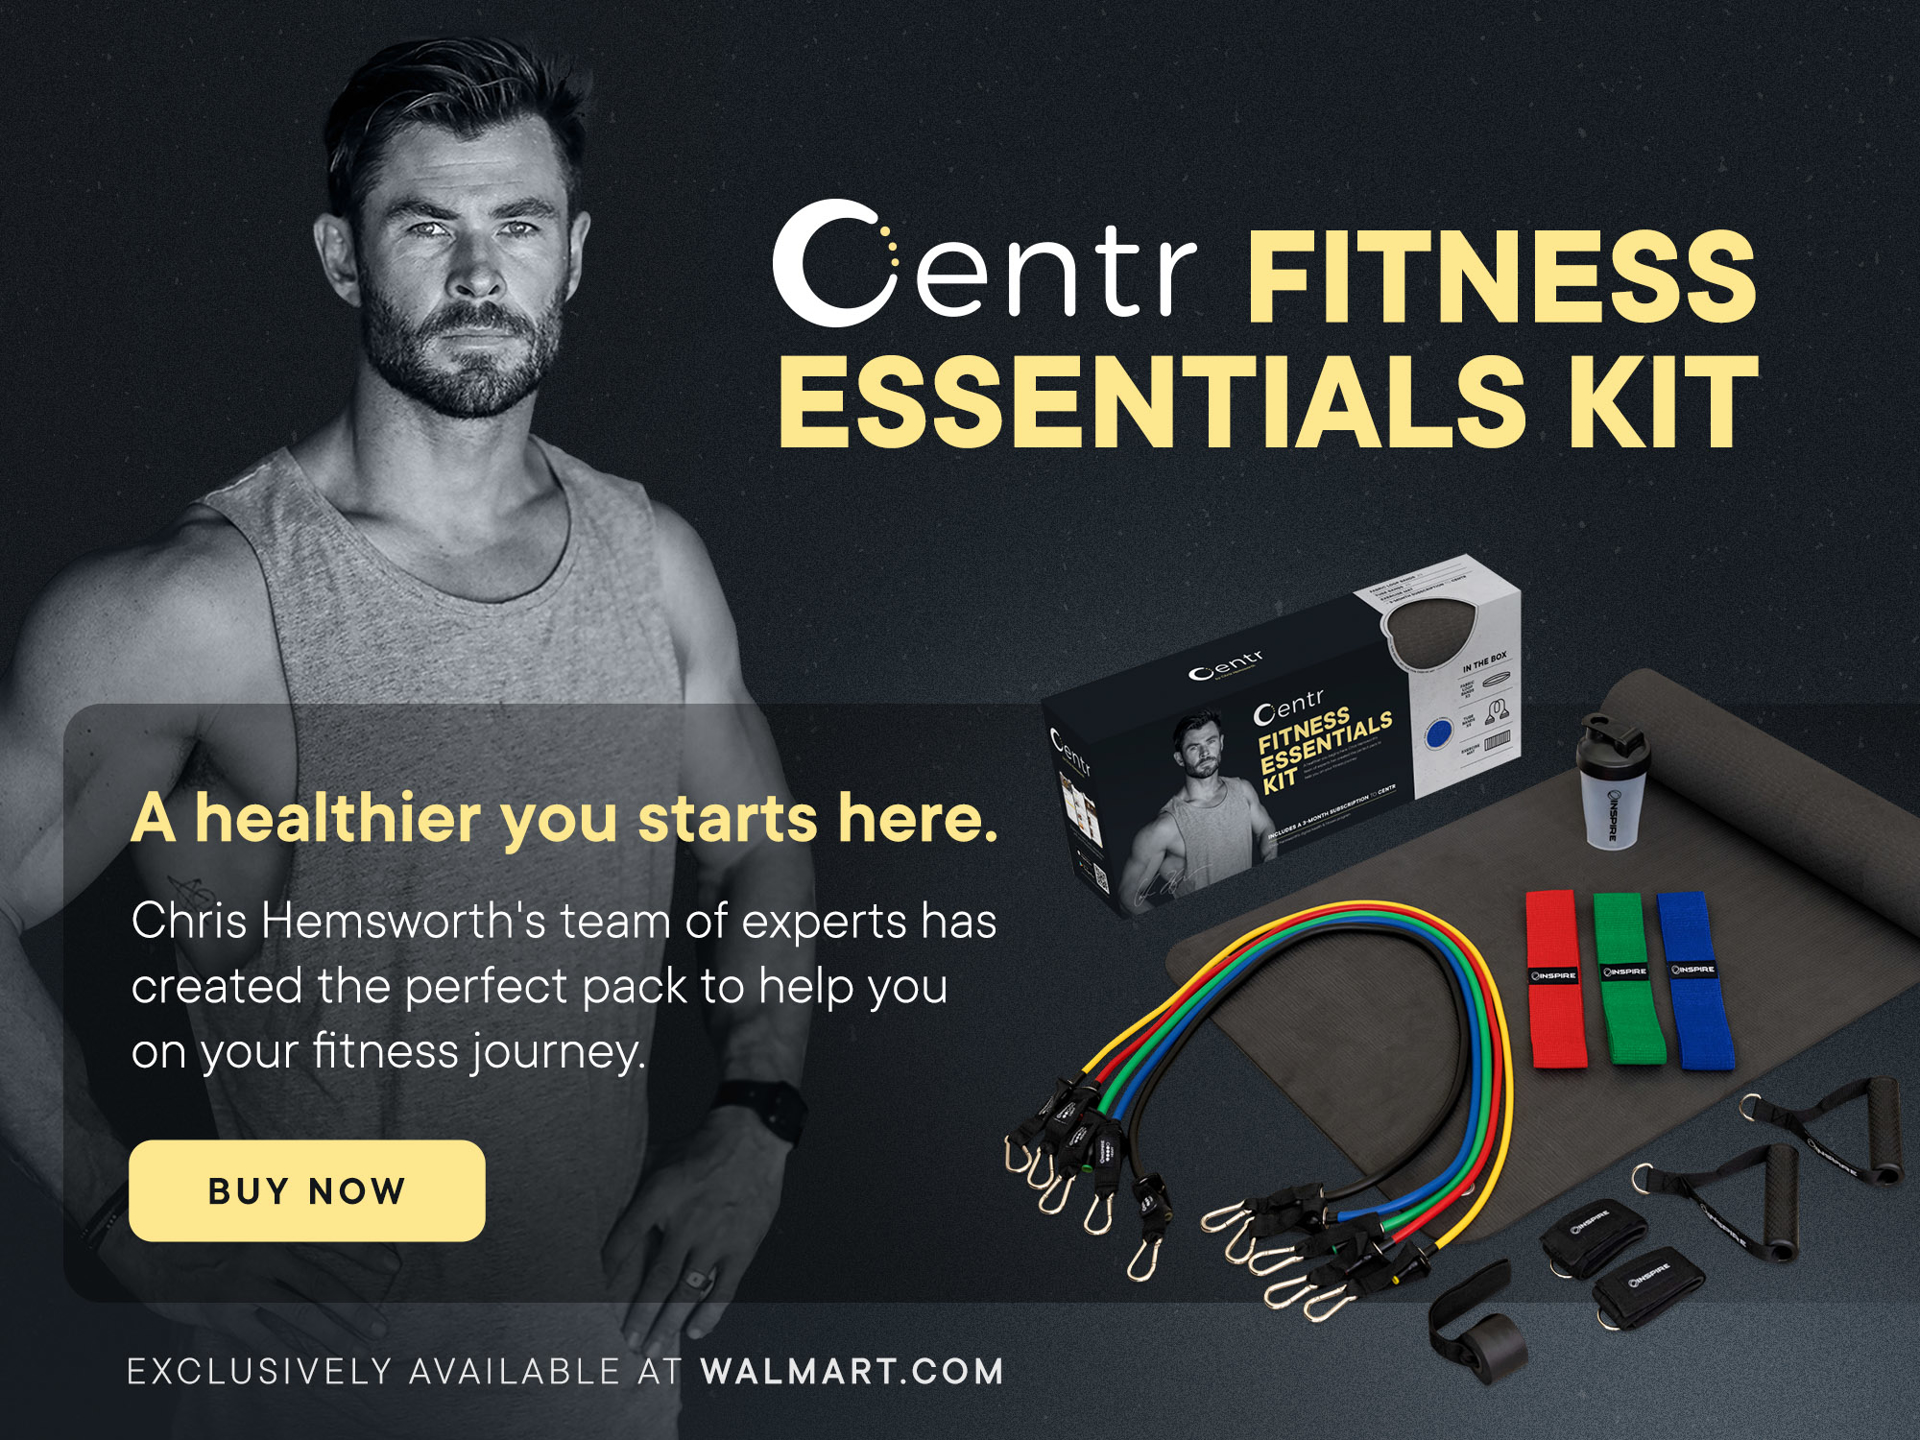 Start right with Centr Begin & the Centr Fitness Essentials Kit